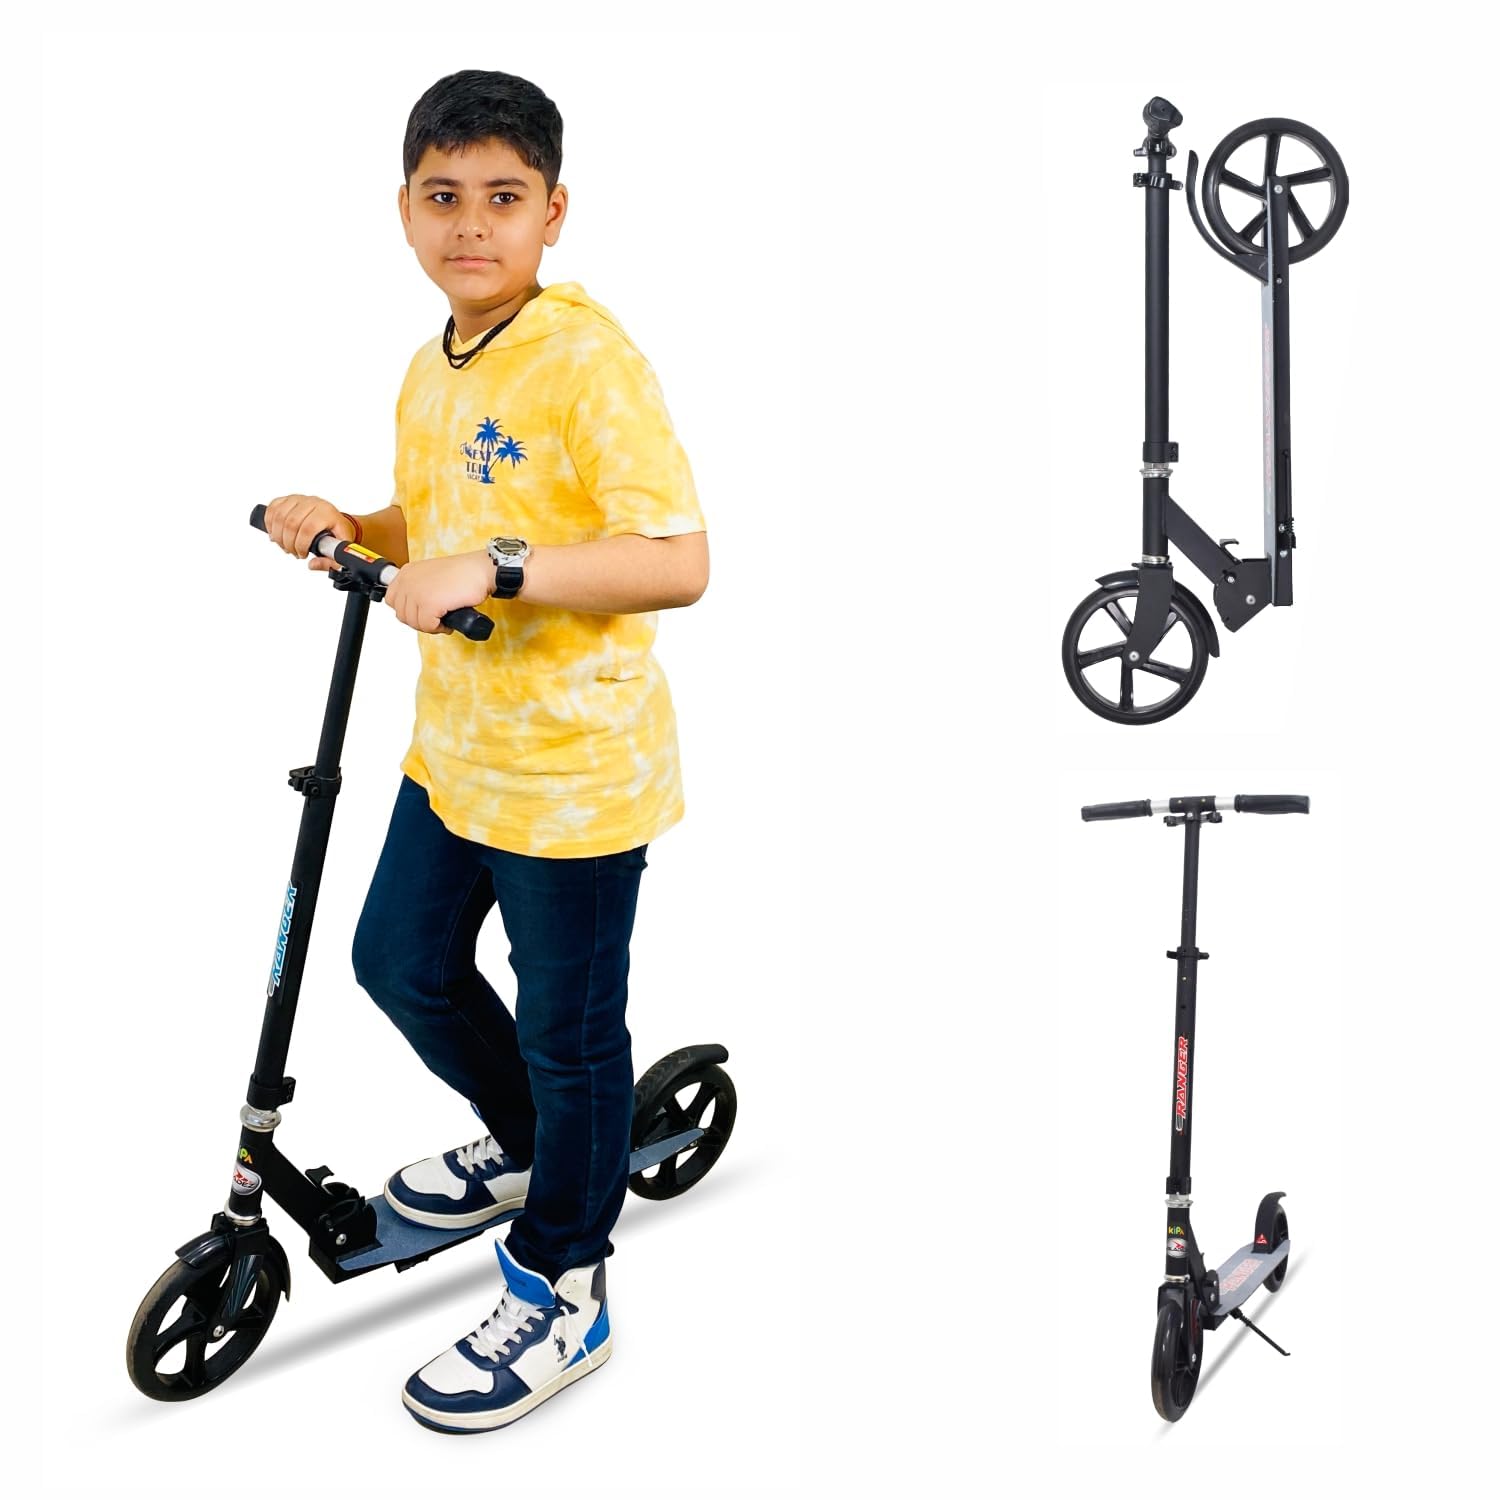 Braintastic Folding Ranger Kick Scooter Light Weight Made with Aeronautical Grade Aluminum Alloy with 3 Adjustment Levels Big 200 mm Wheels Scooters with Carry Strap for Kids